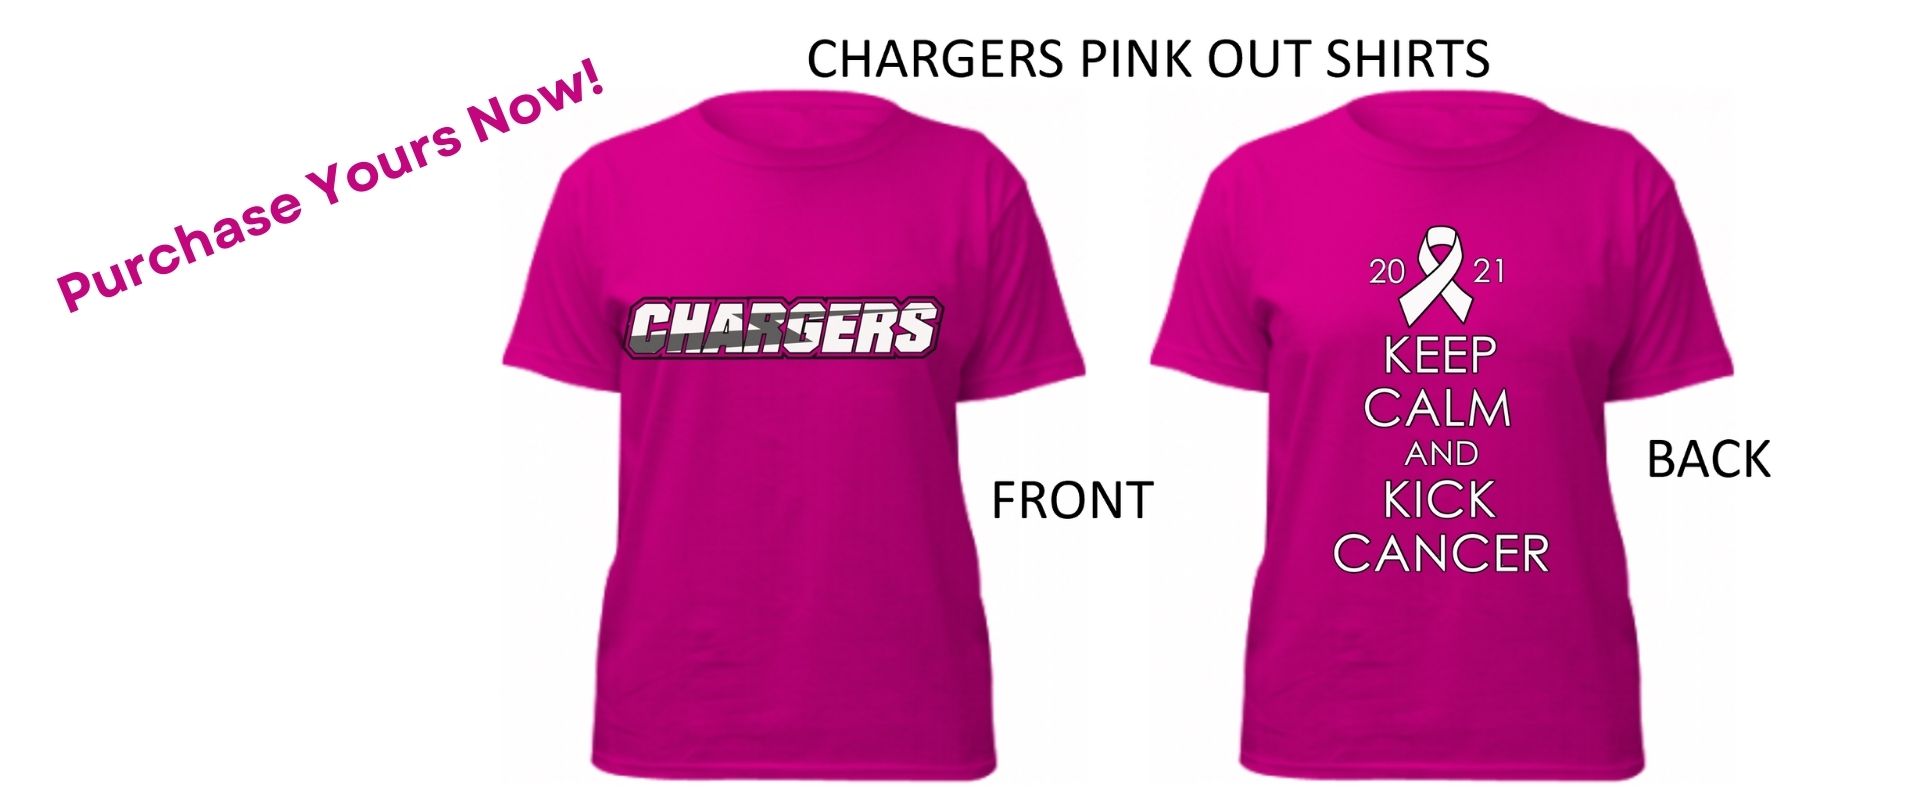 Team Fundraiser - Chargers Pink Out Shirts